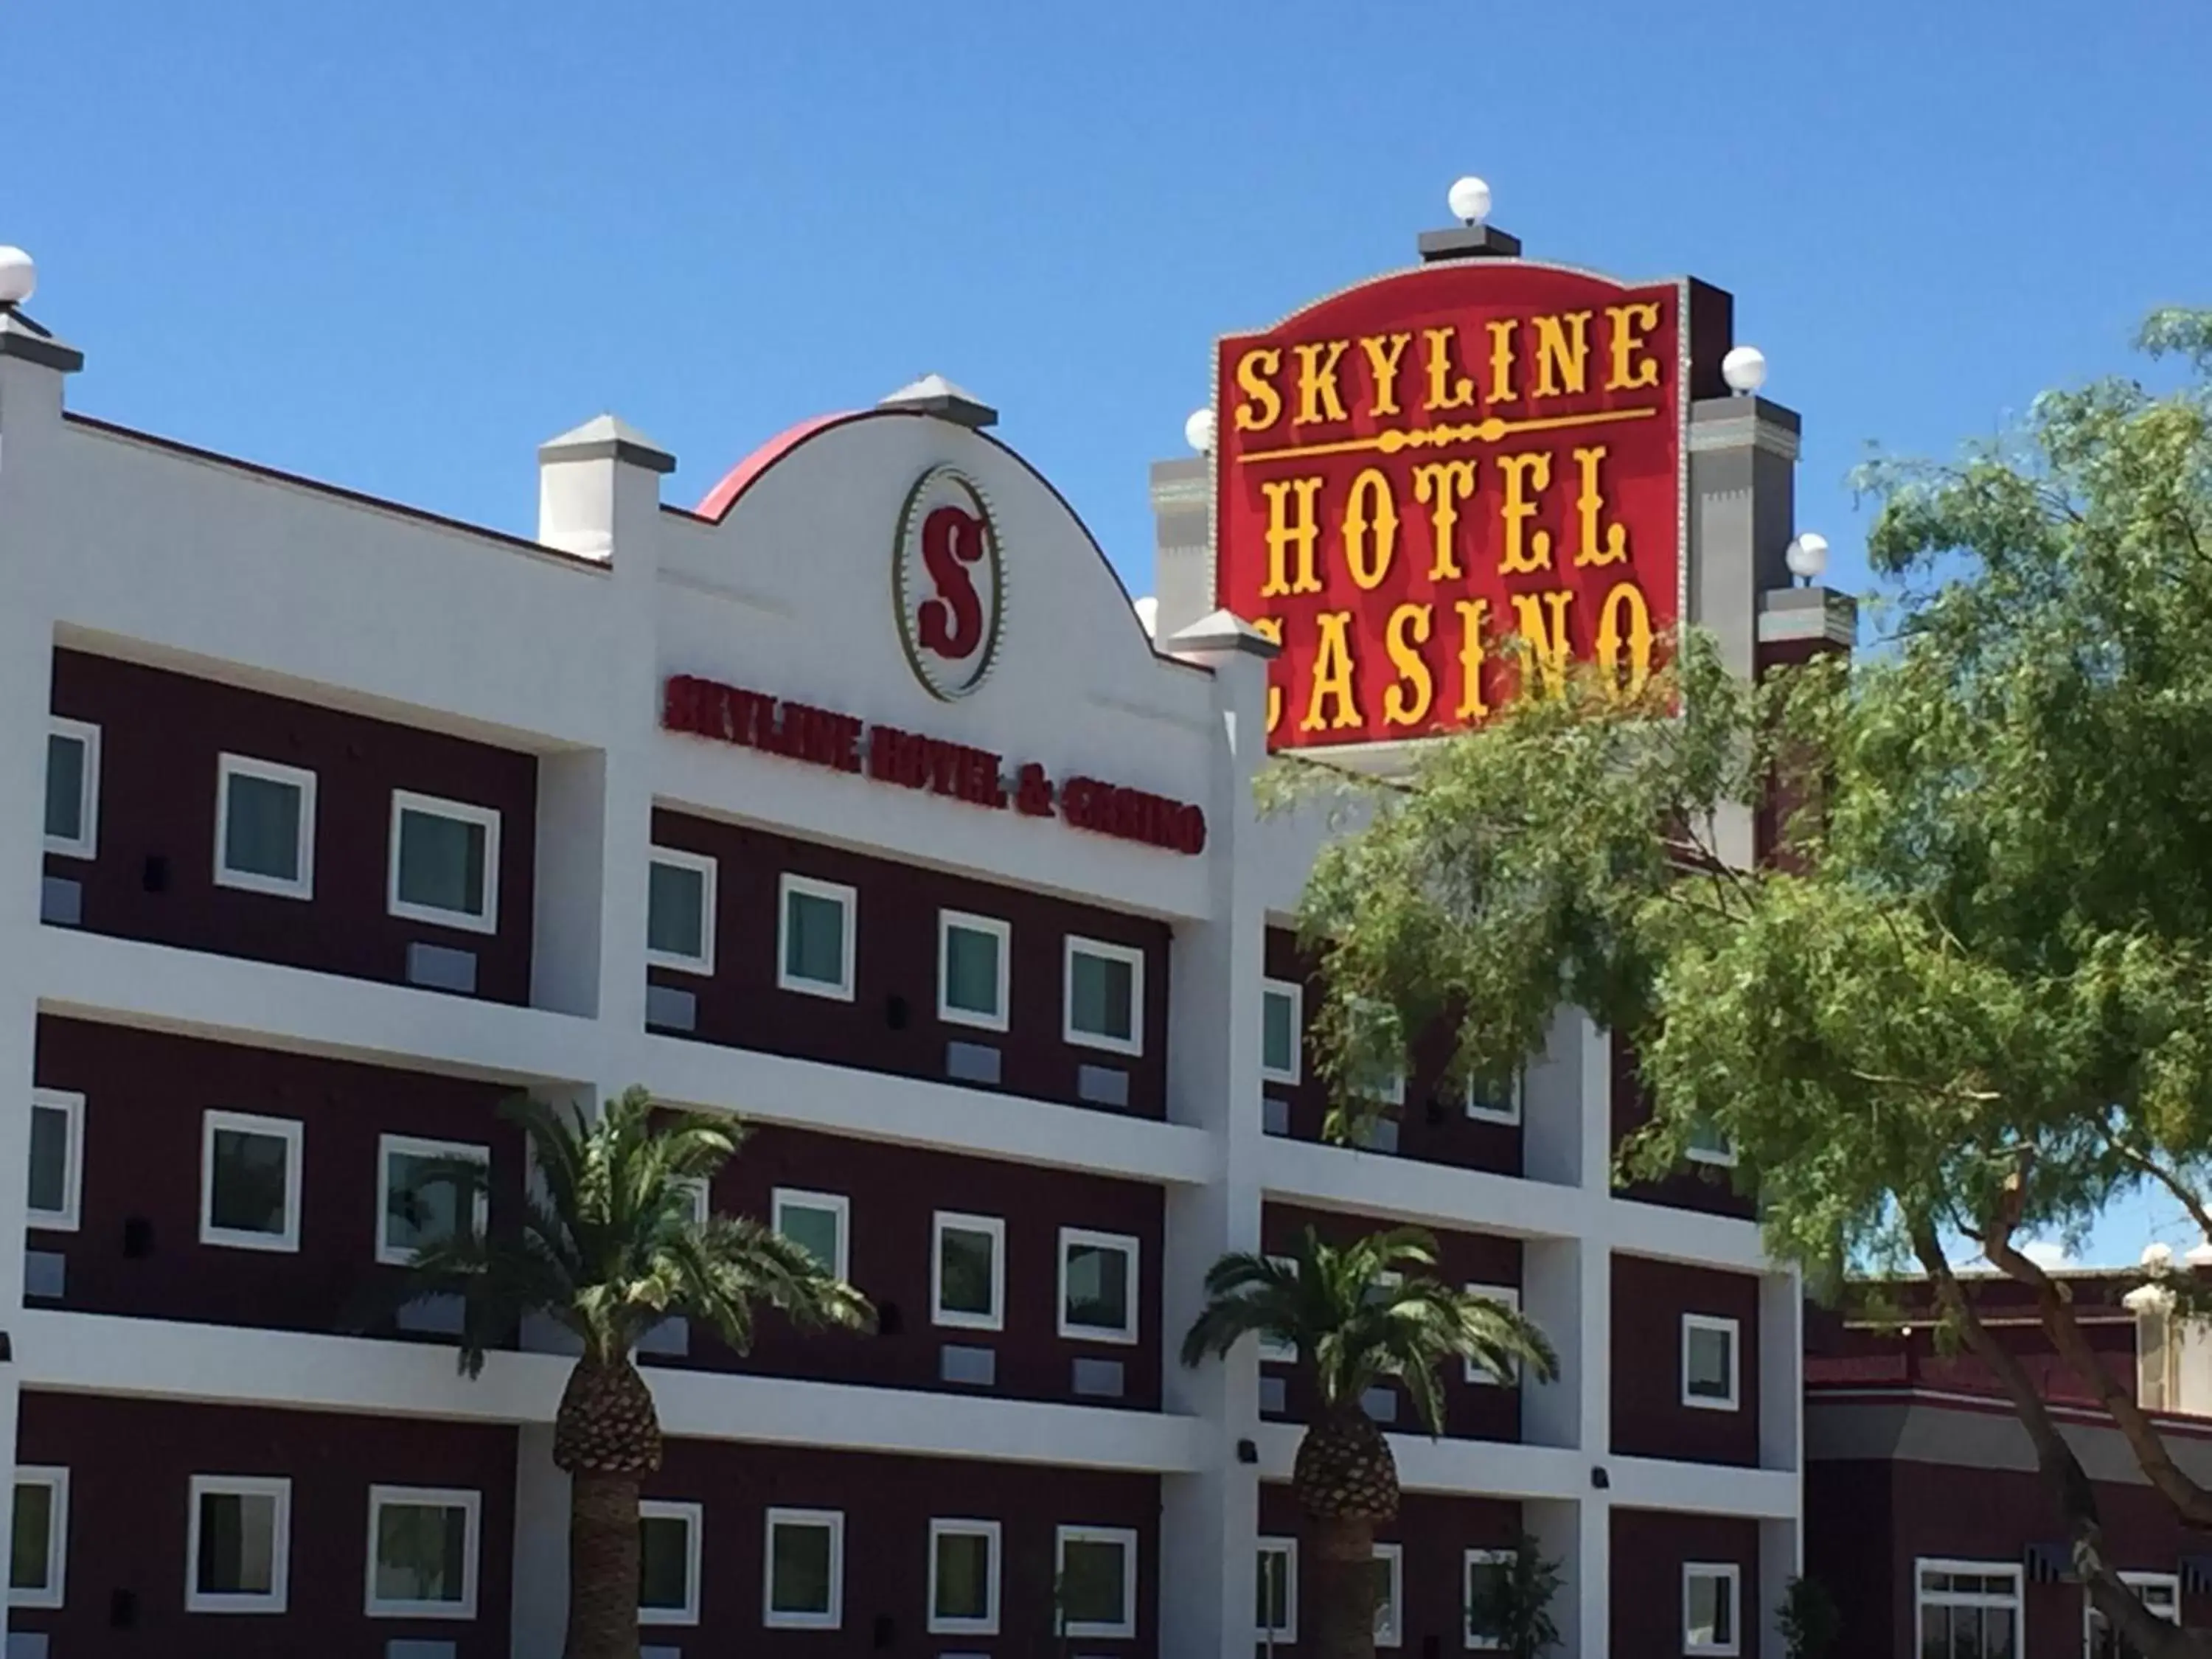 Facade/entrance, Property Building in Skyline Hotel and Casino